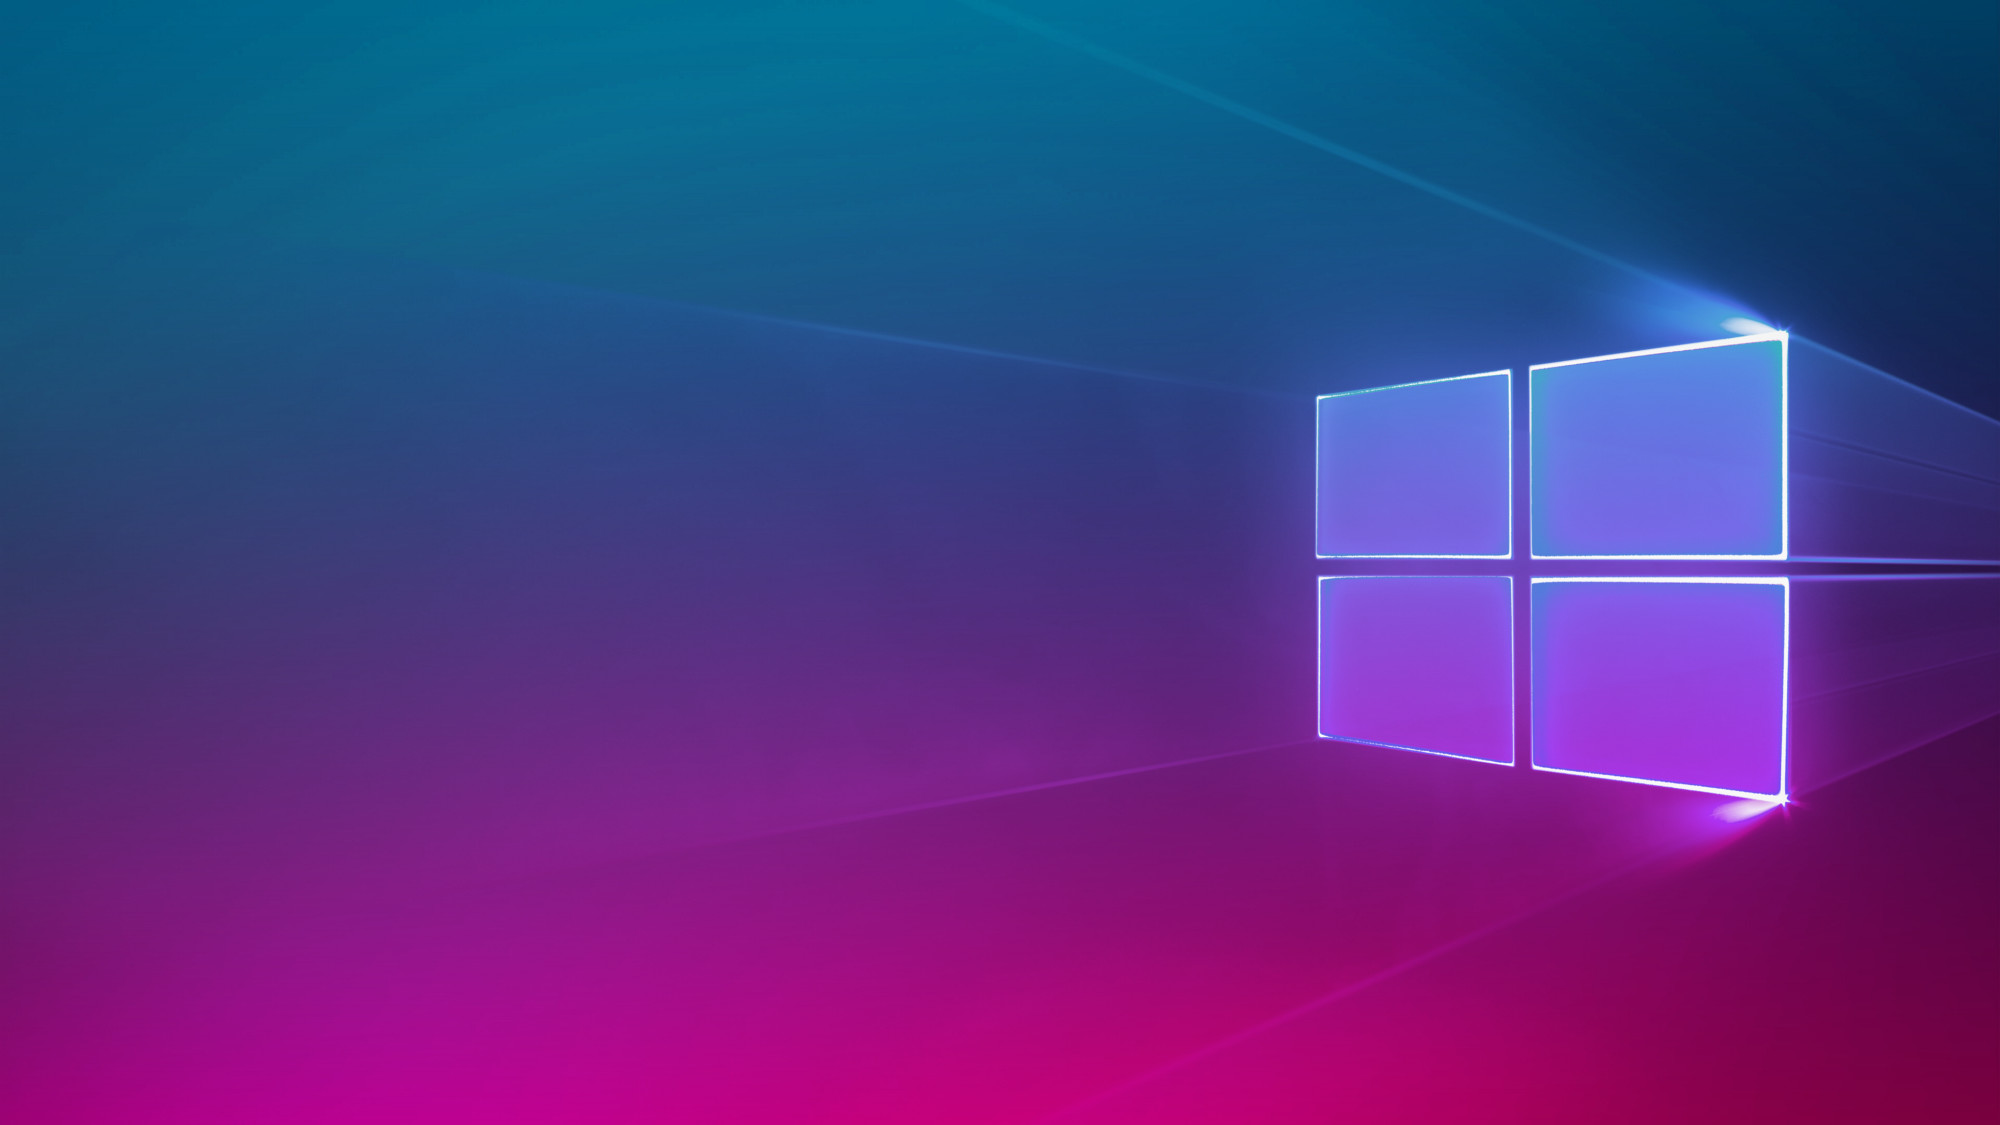 You Can Download All The Wallpapers Below From My Onedrive - Windows 10